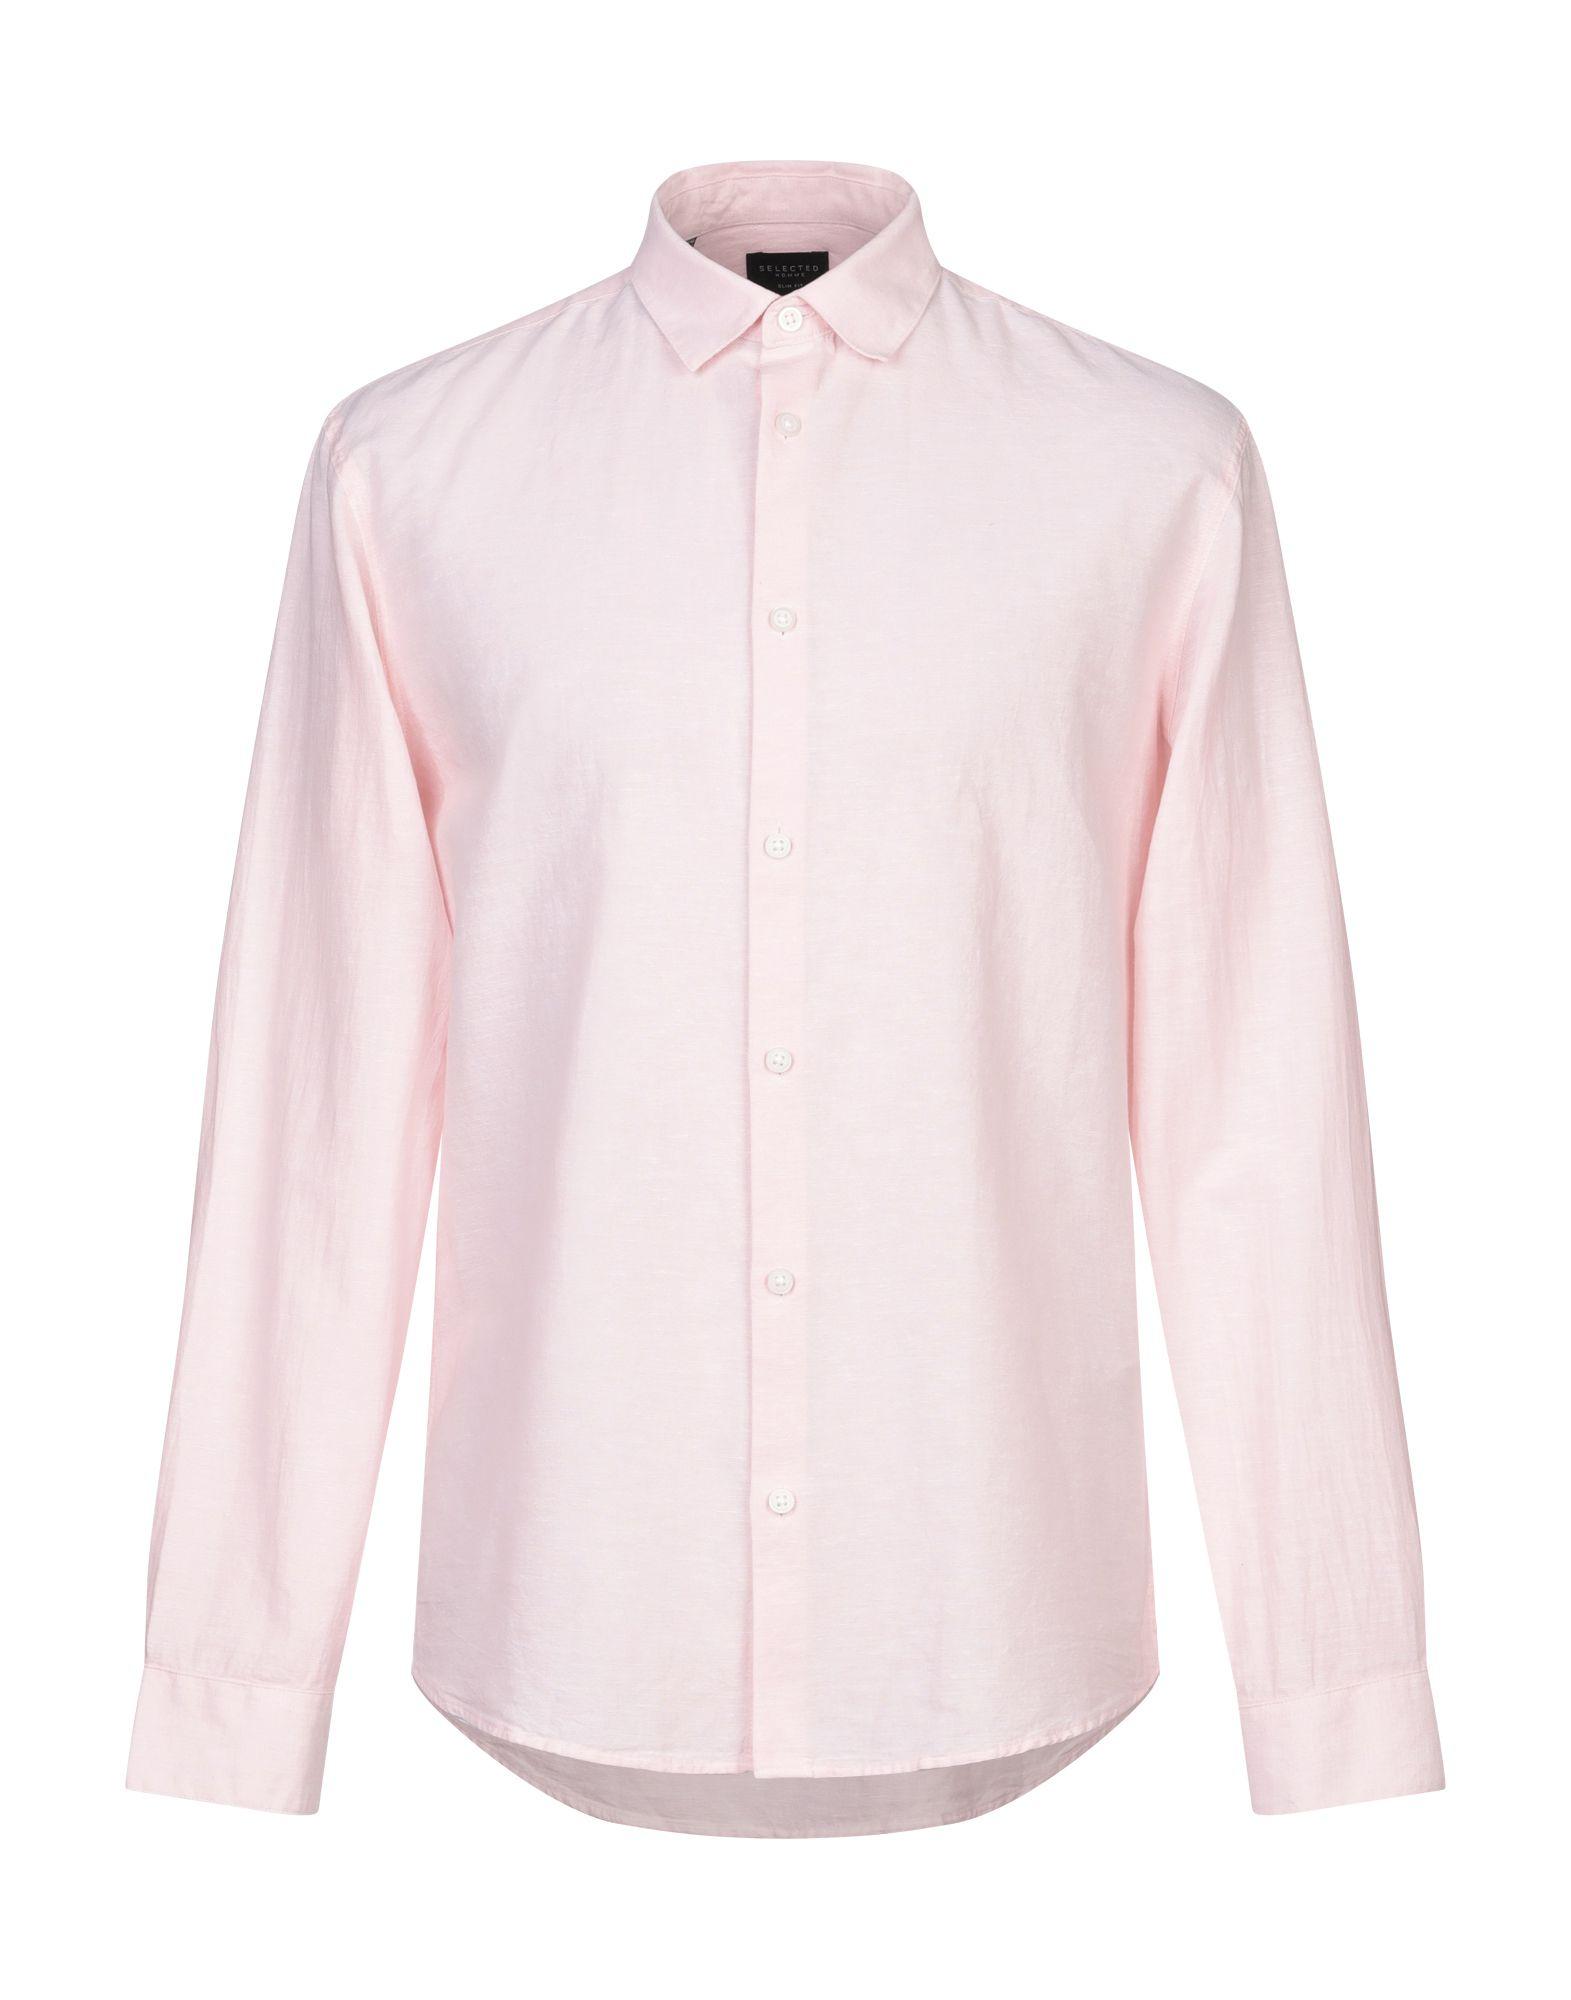 SELECTED Cotton Shirt in Pink for Men - Lyst